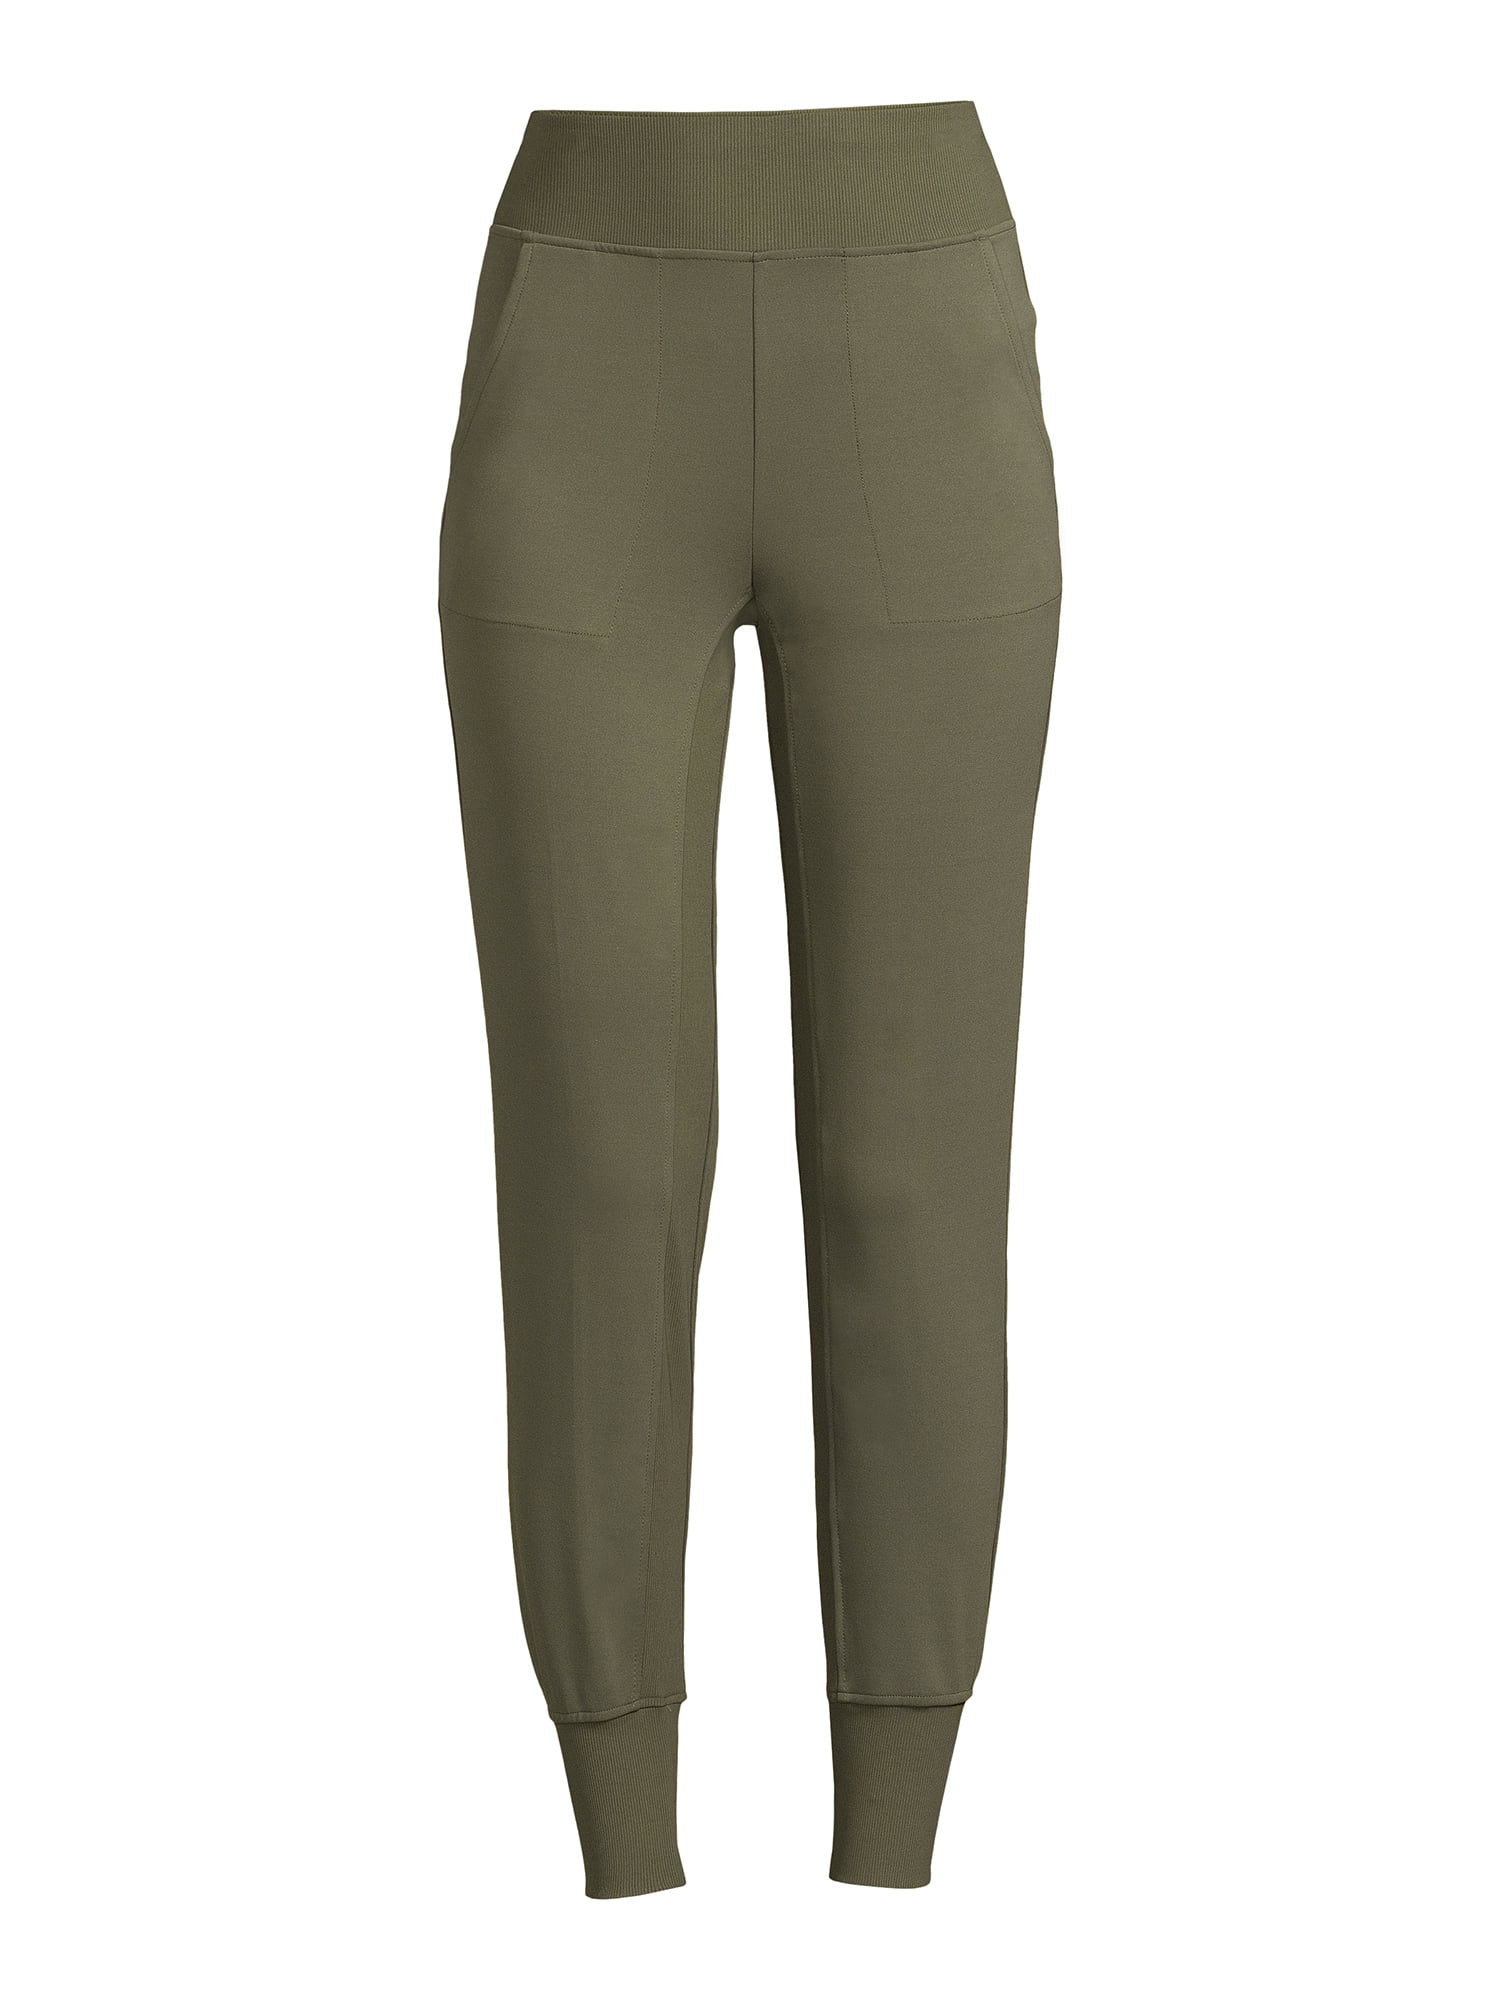 Stay stylish and comfortable with Avia Olive Green Jogger Pants